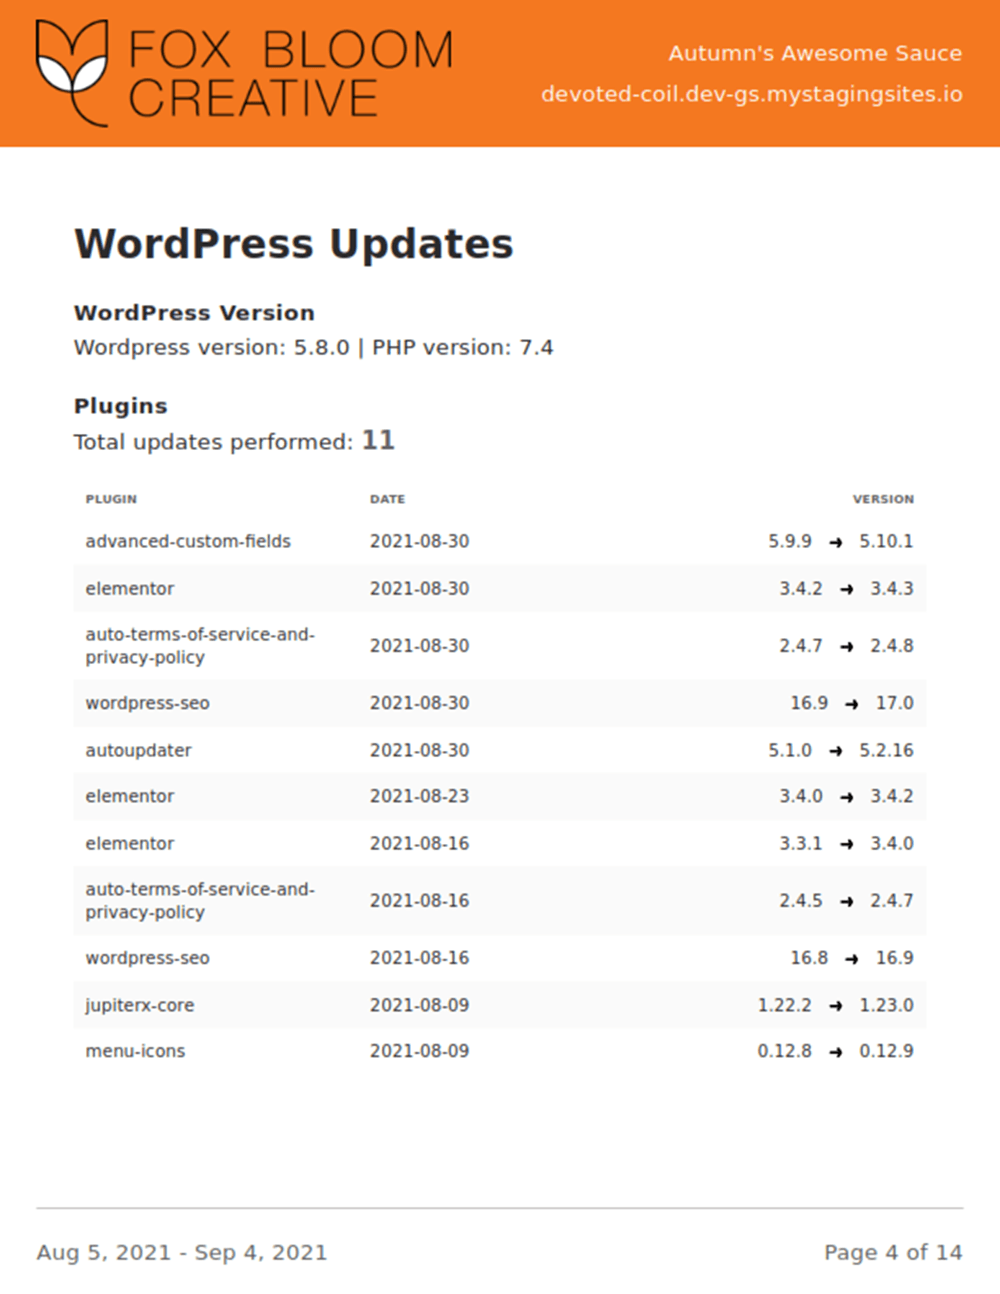 growth suite User client reports WordPress Plugin Update Detail